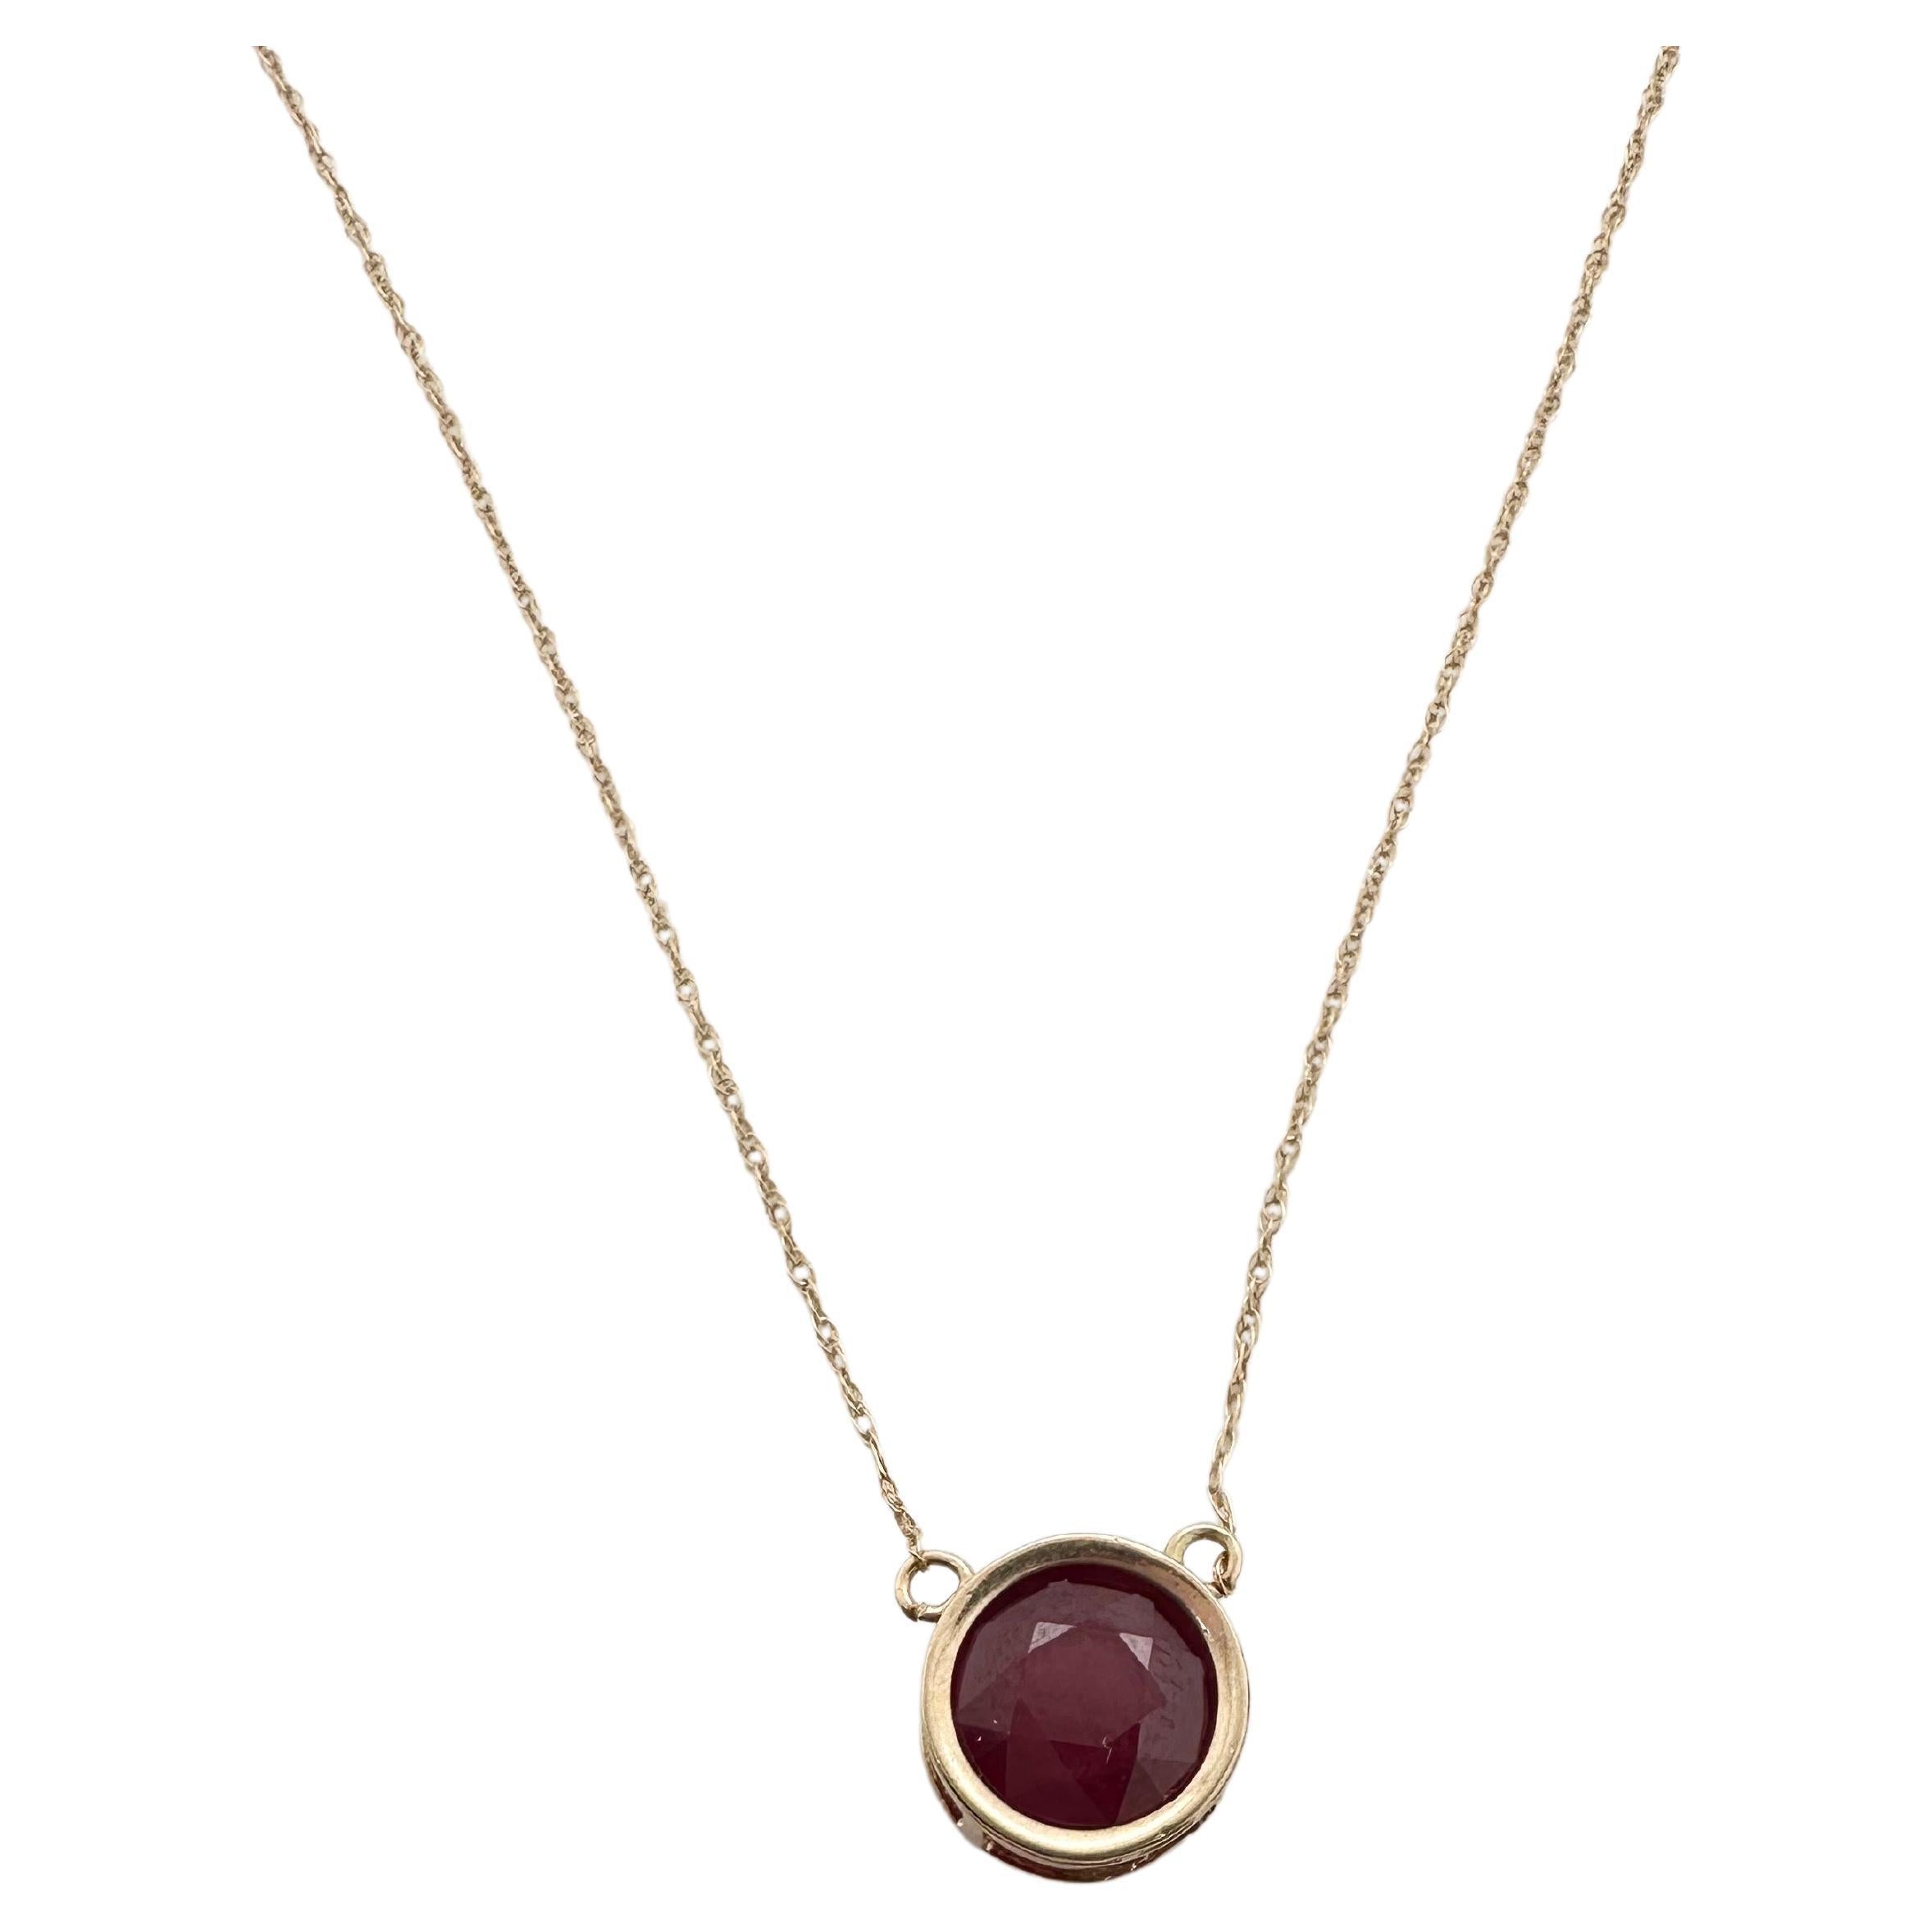 8mm Large Ruby solitaire pendant necklace 10KT yellow gold Valentines gift For Sale